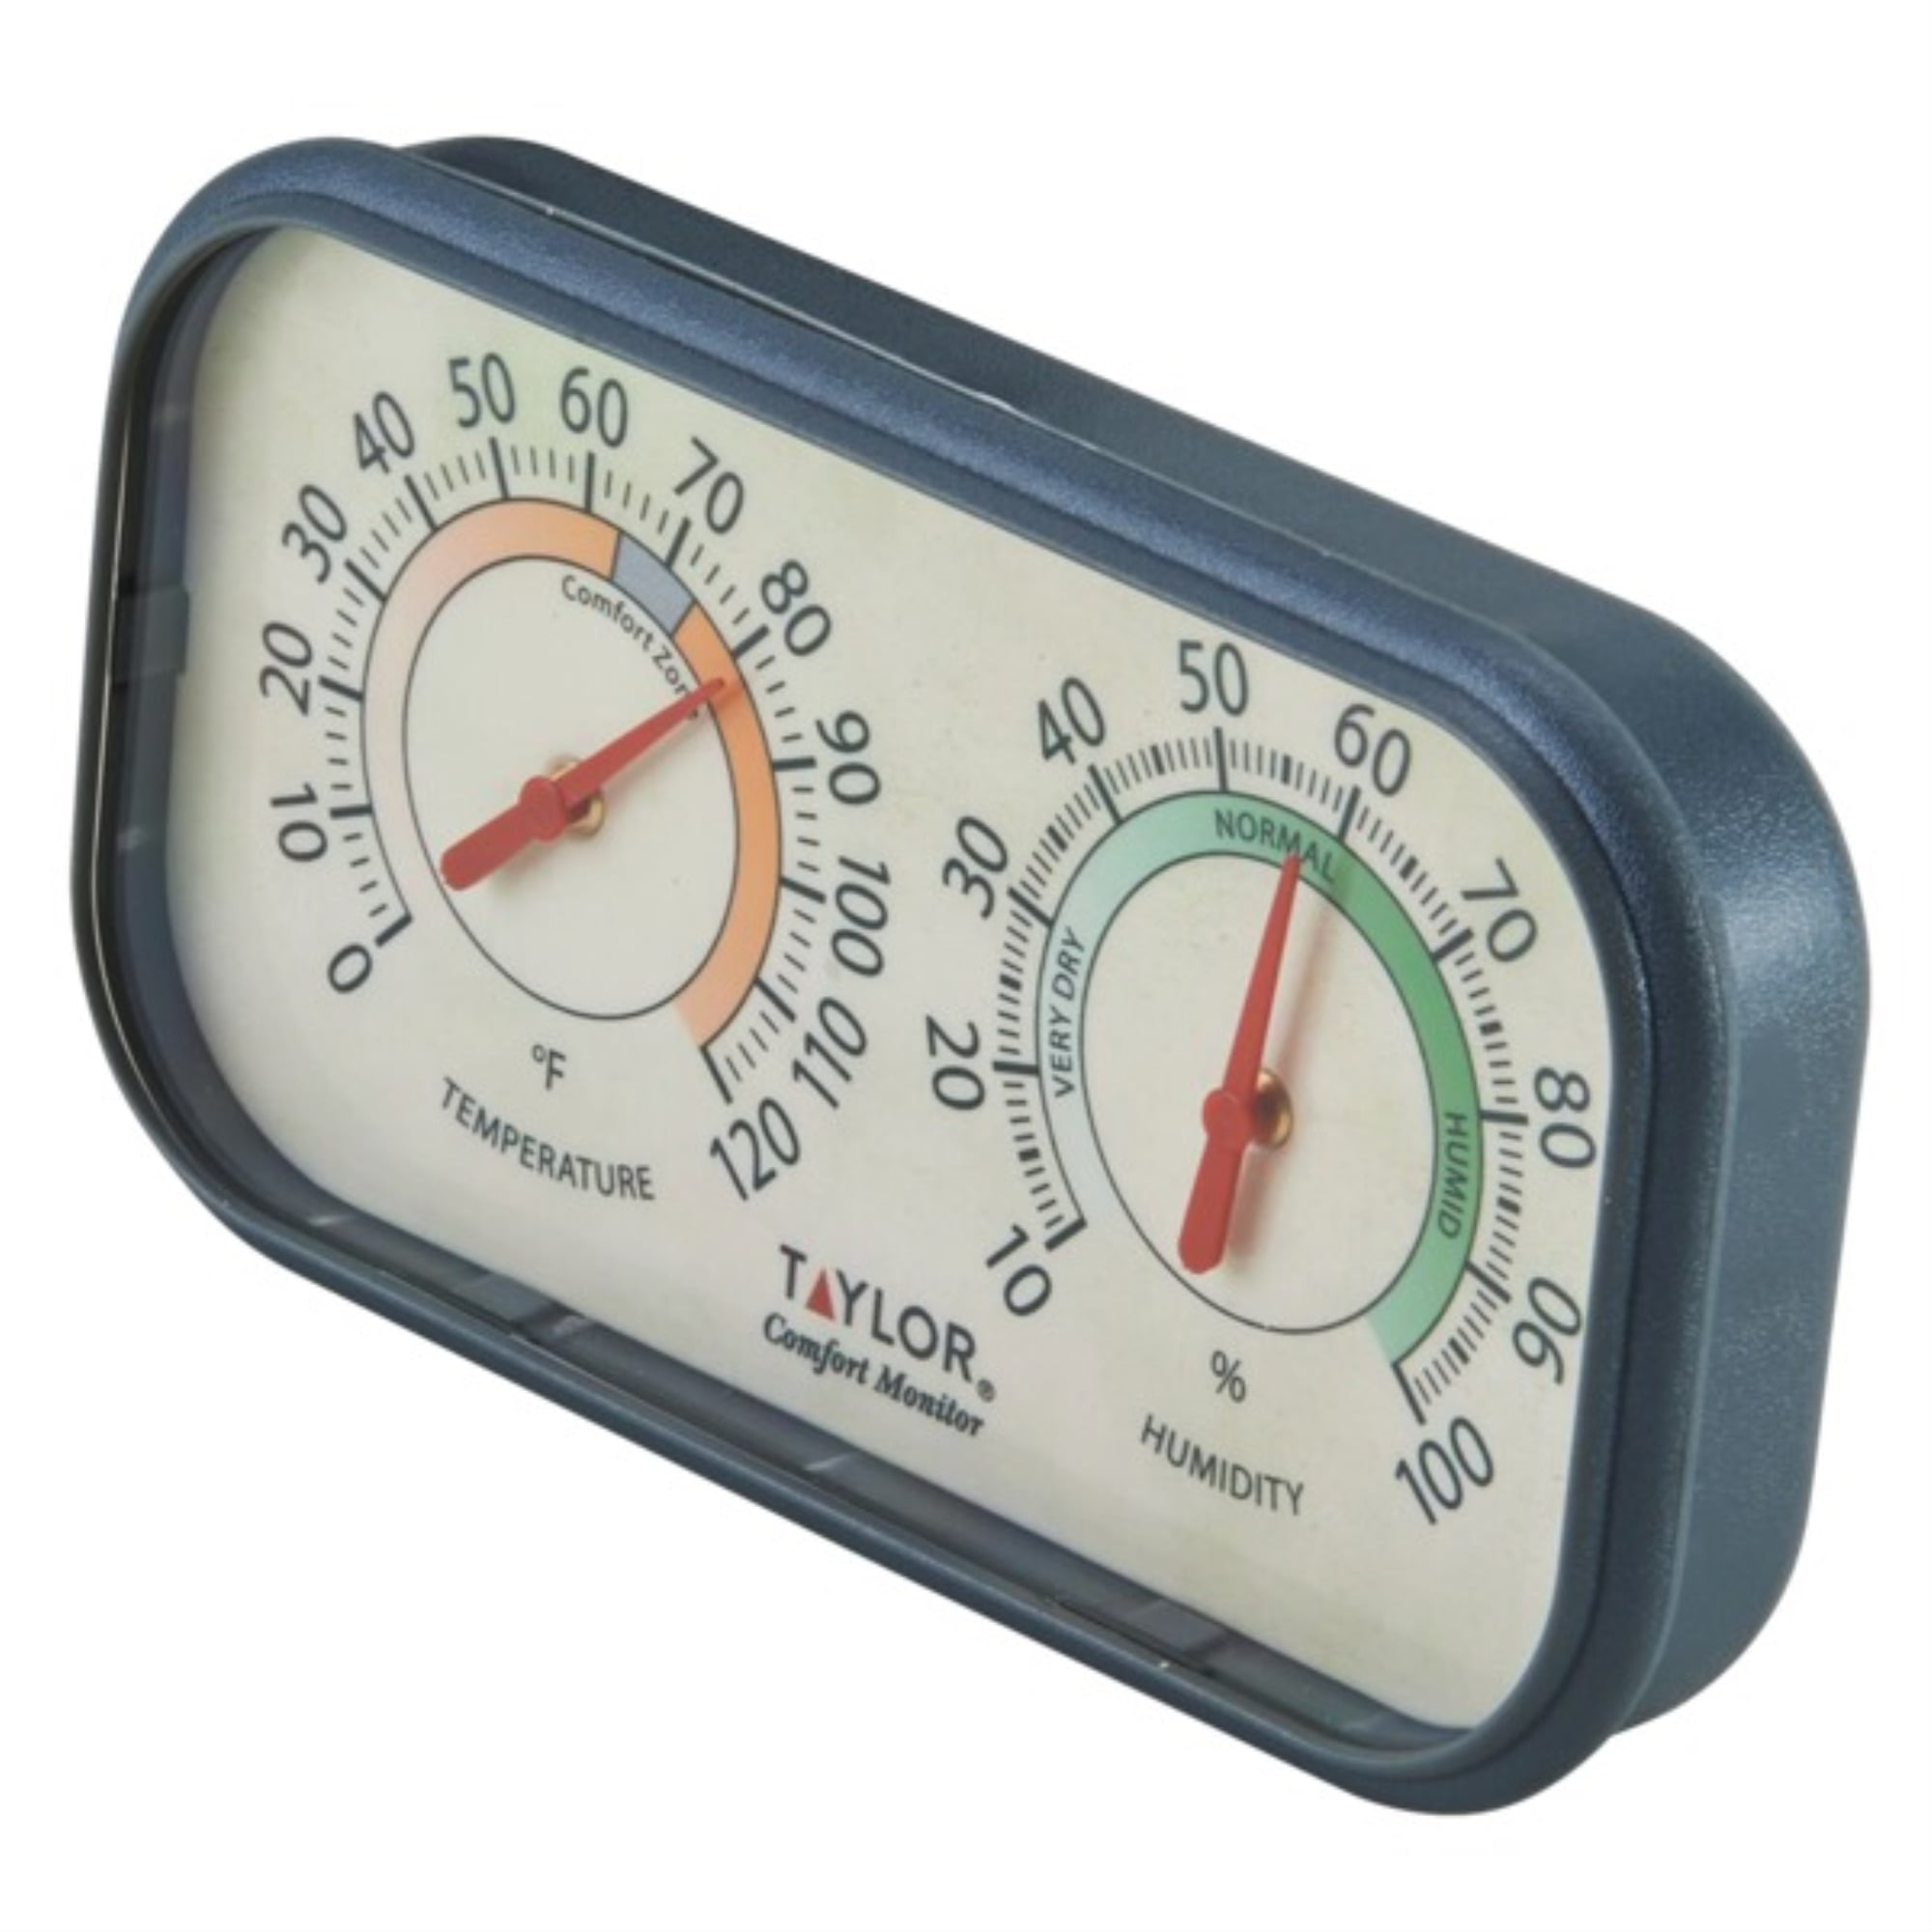 Taylor Desk/Wall Thermometer